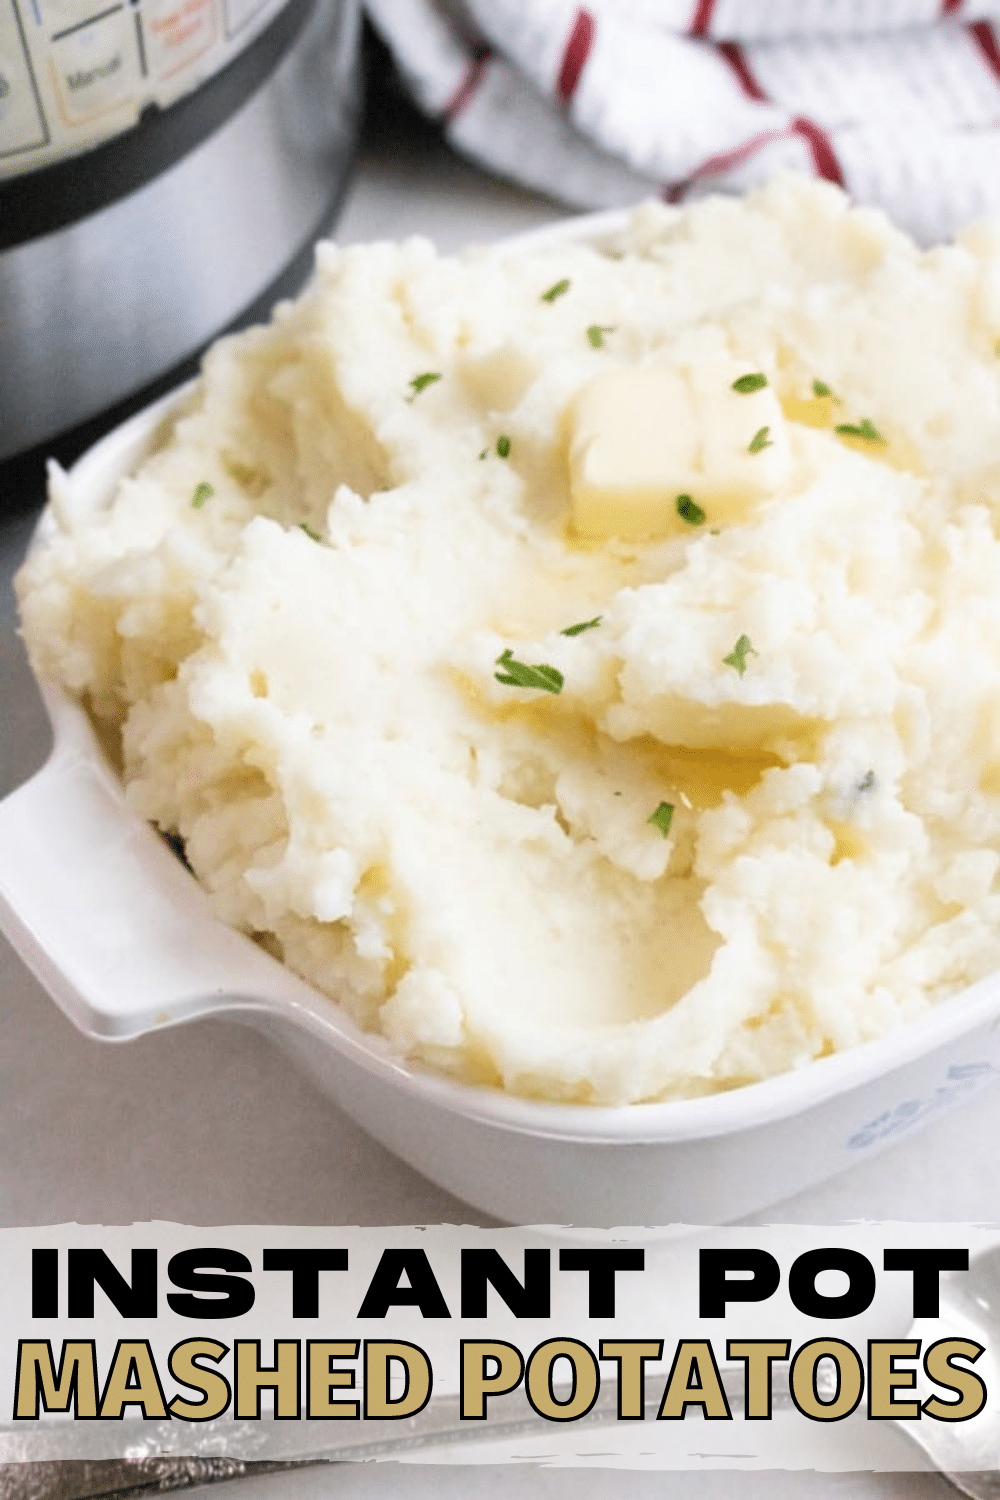 These Instant Pot Mashed Potatoes are faster and just as tasty as stovetop mashed potatoes. #sidedishes #potatoes #instantpot #pressurecooker via @wondermomwannab